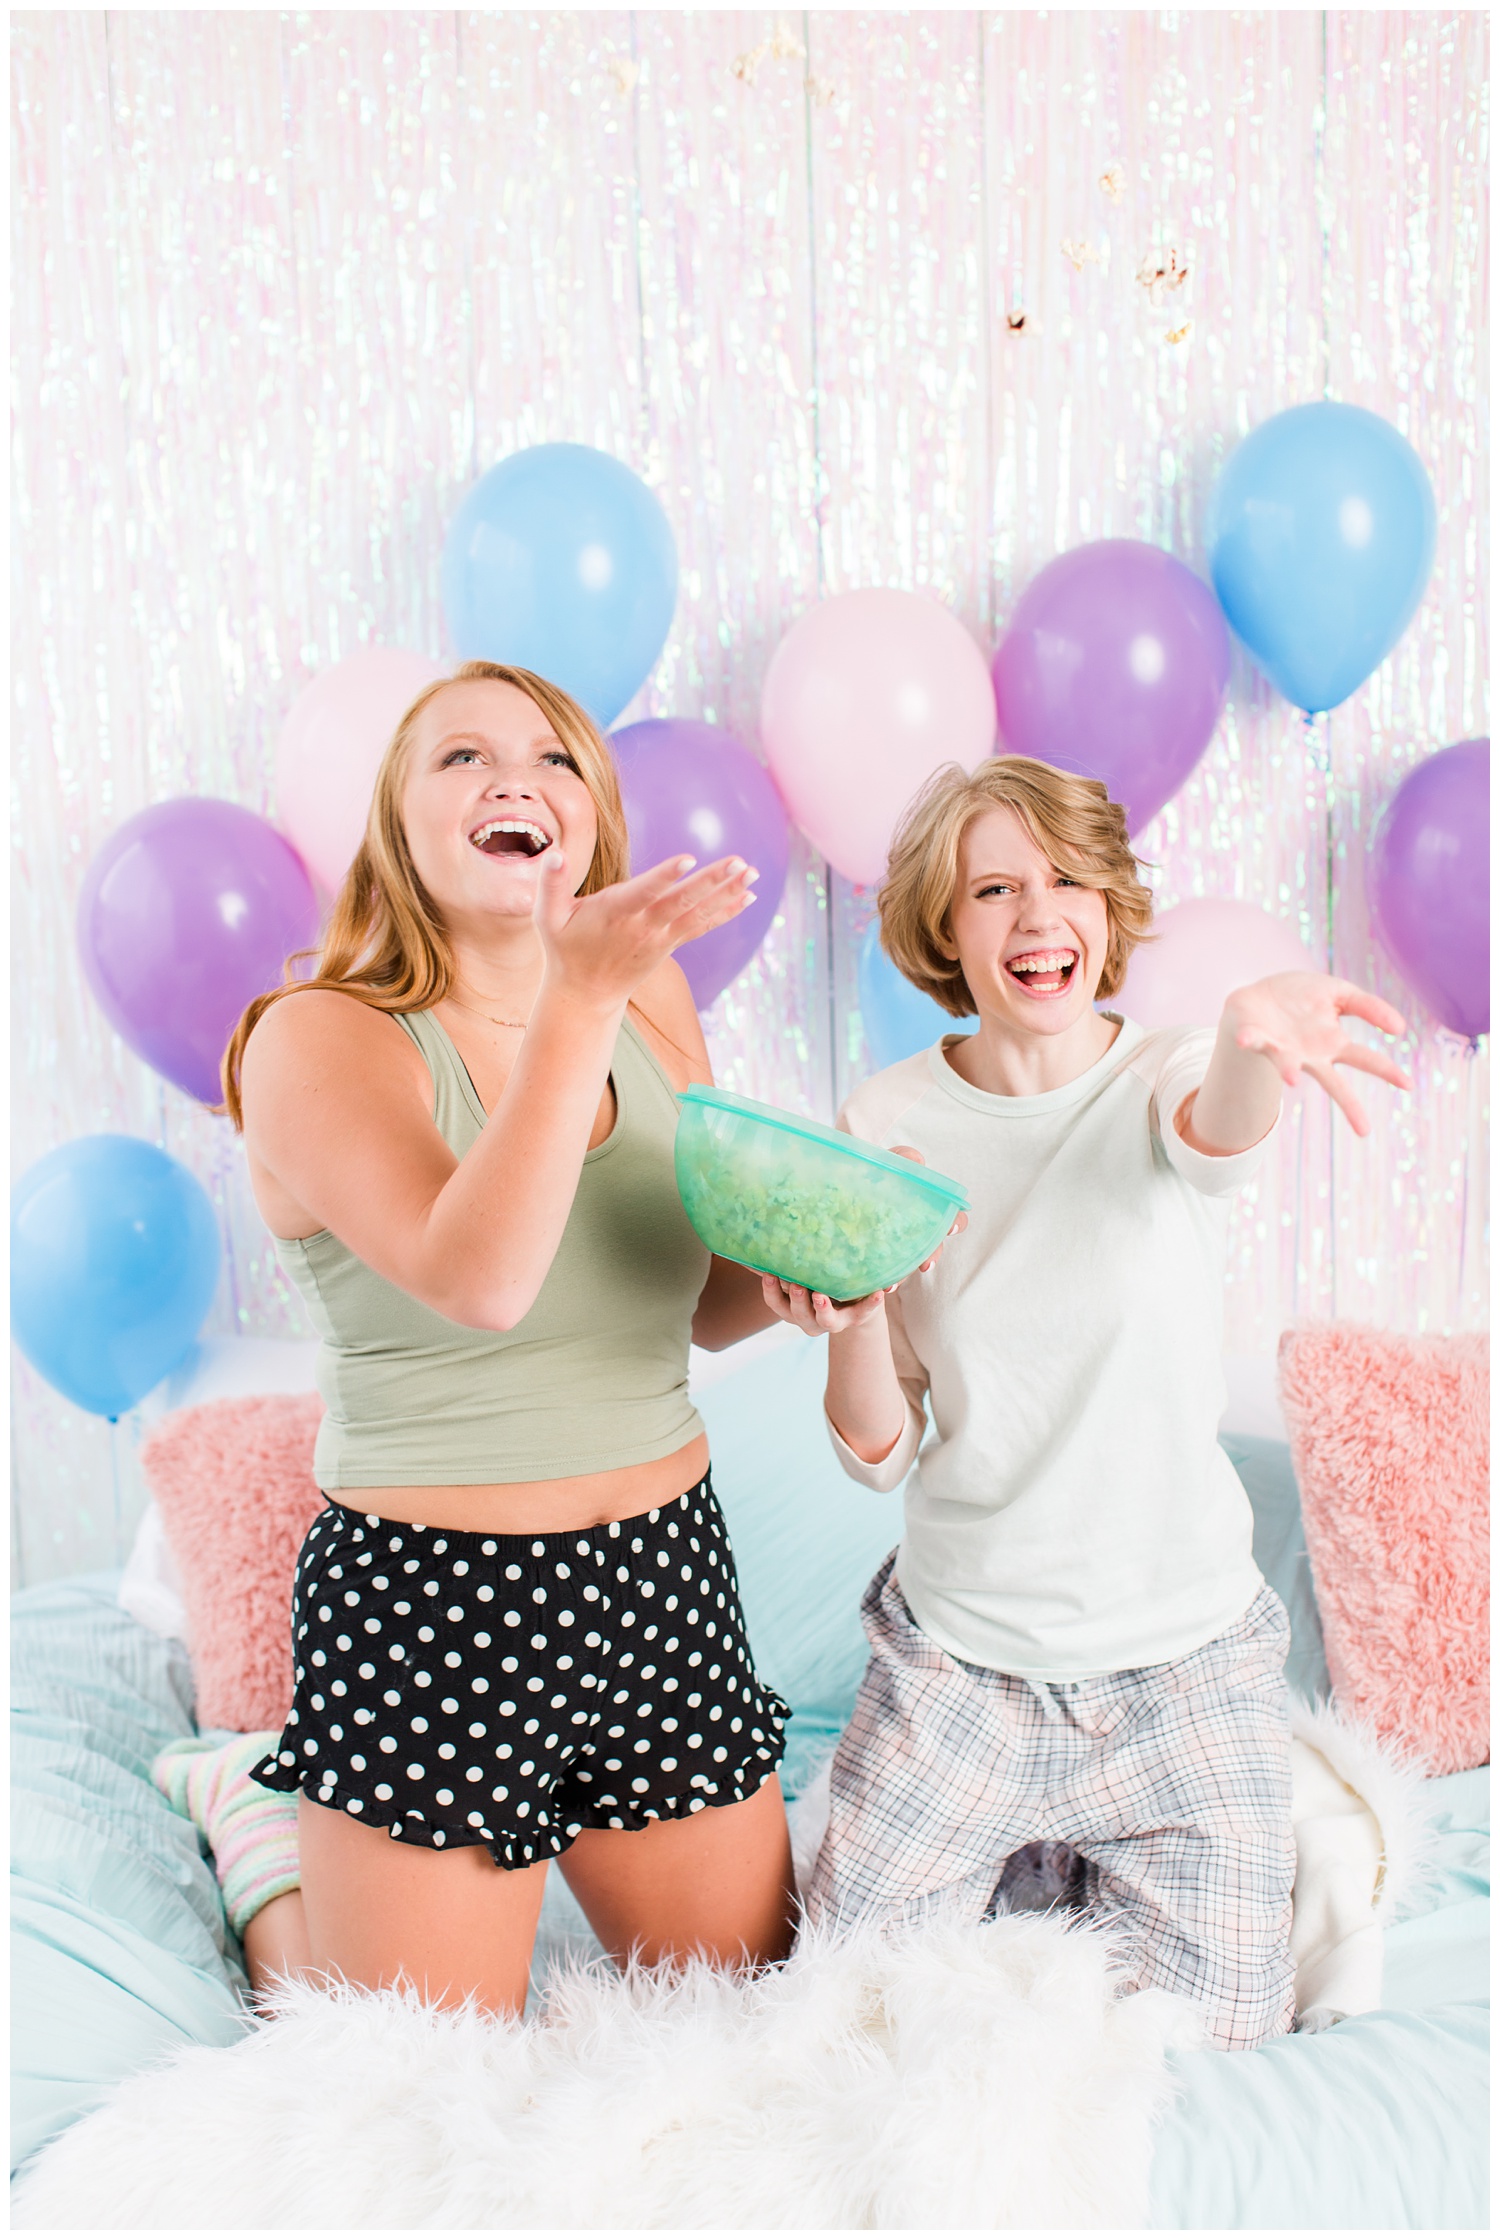 Senior girls throwing popcorn and laughing during a senior sleepover-styled photoshoot with iridescent streamers and balloons. | CB Studio